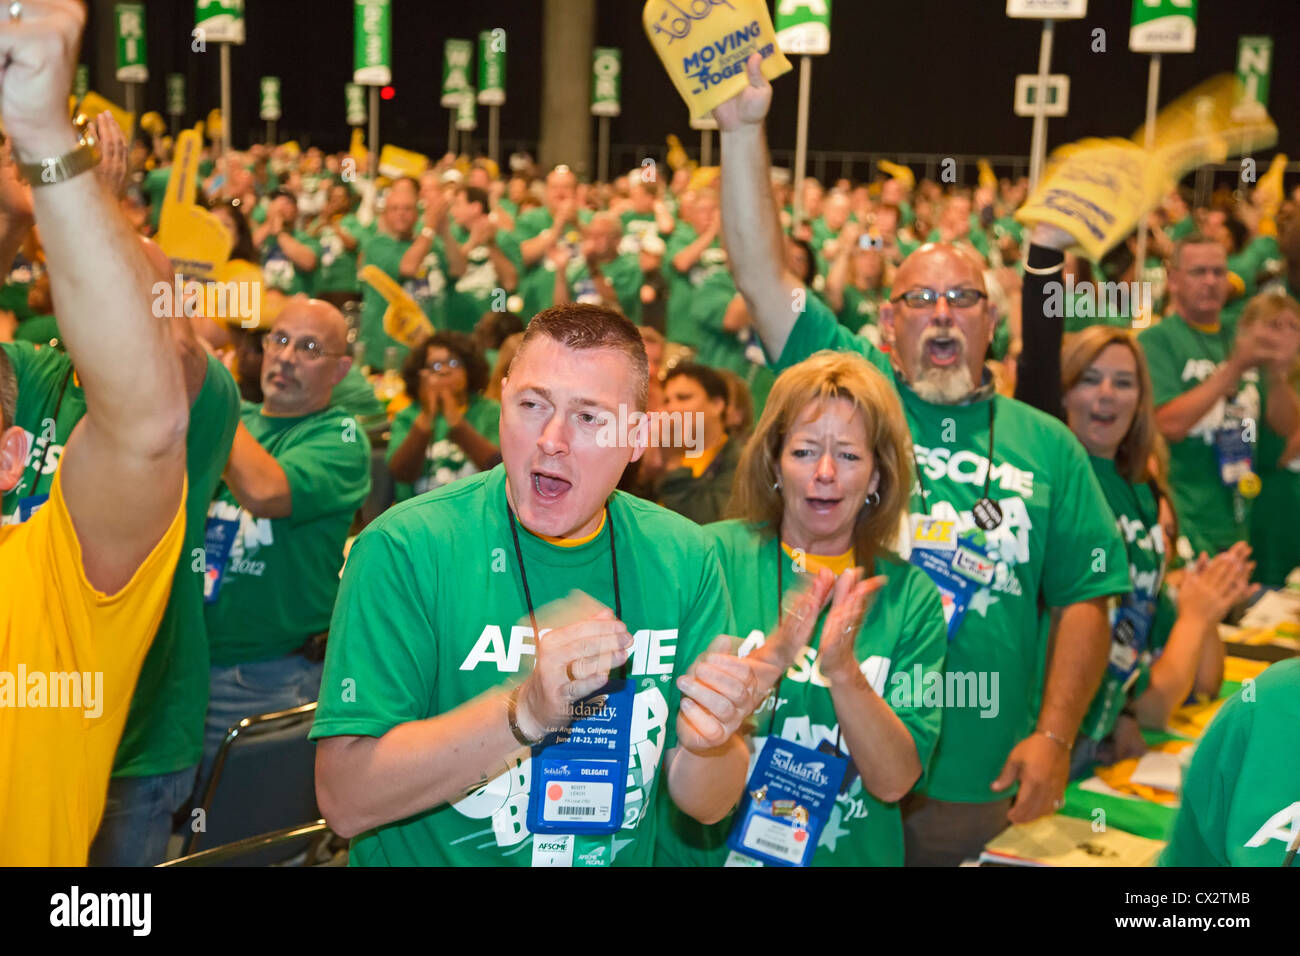 Los Angeles, California - The biannual convention of the American Federation of State, County and Municipal Employees (AFSCME). Stock Photo